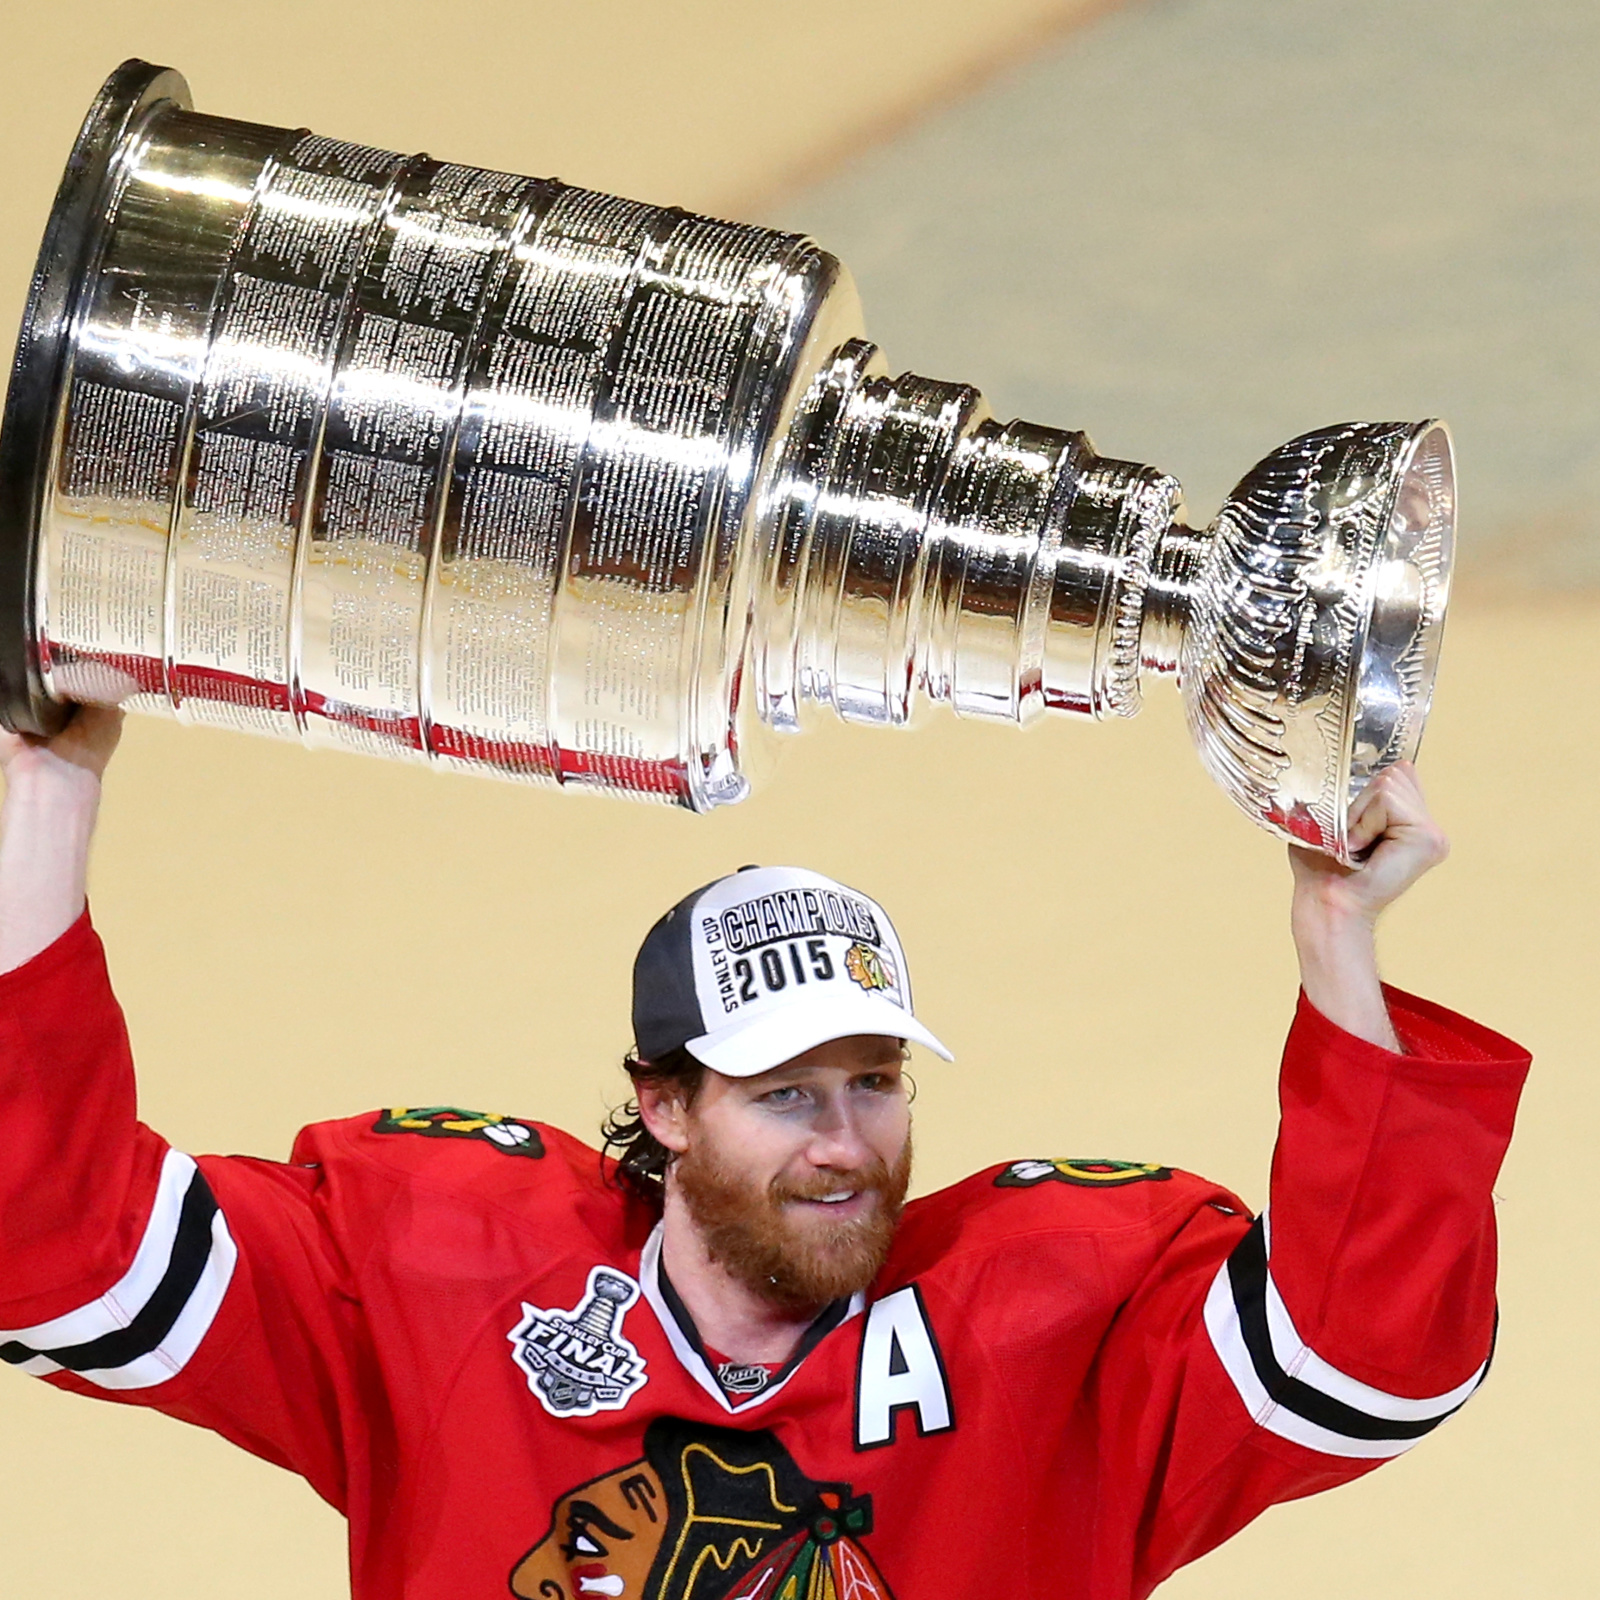 MSU alumnus, Stanley-Cup champion Duncan Keith retiring from NHL